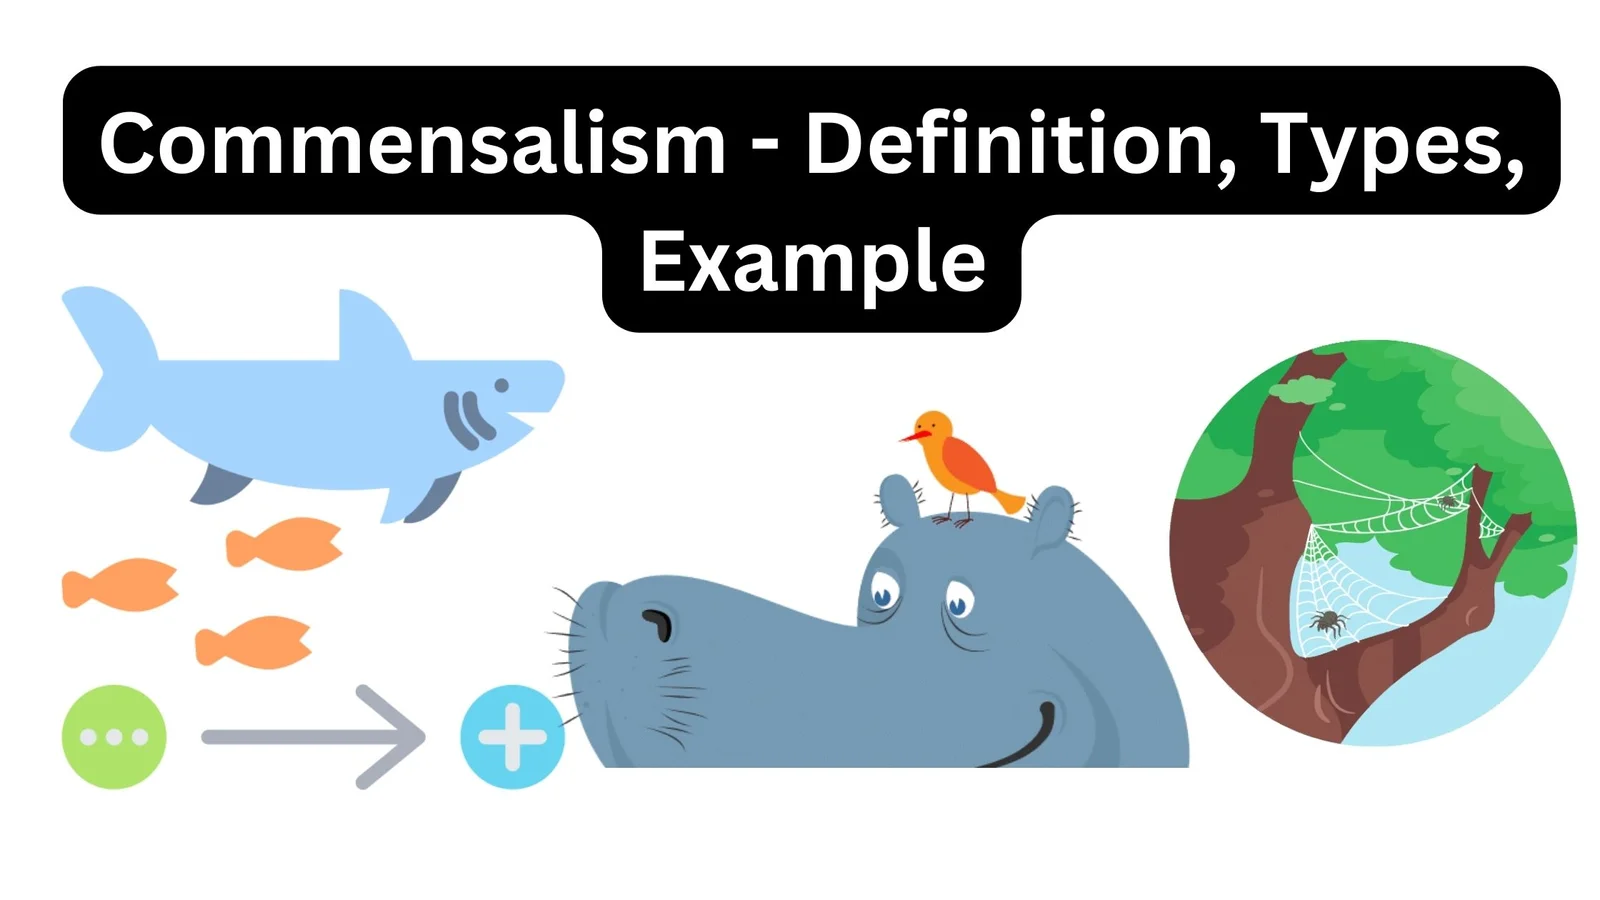 Commensalism - Definition, Types, Example